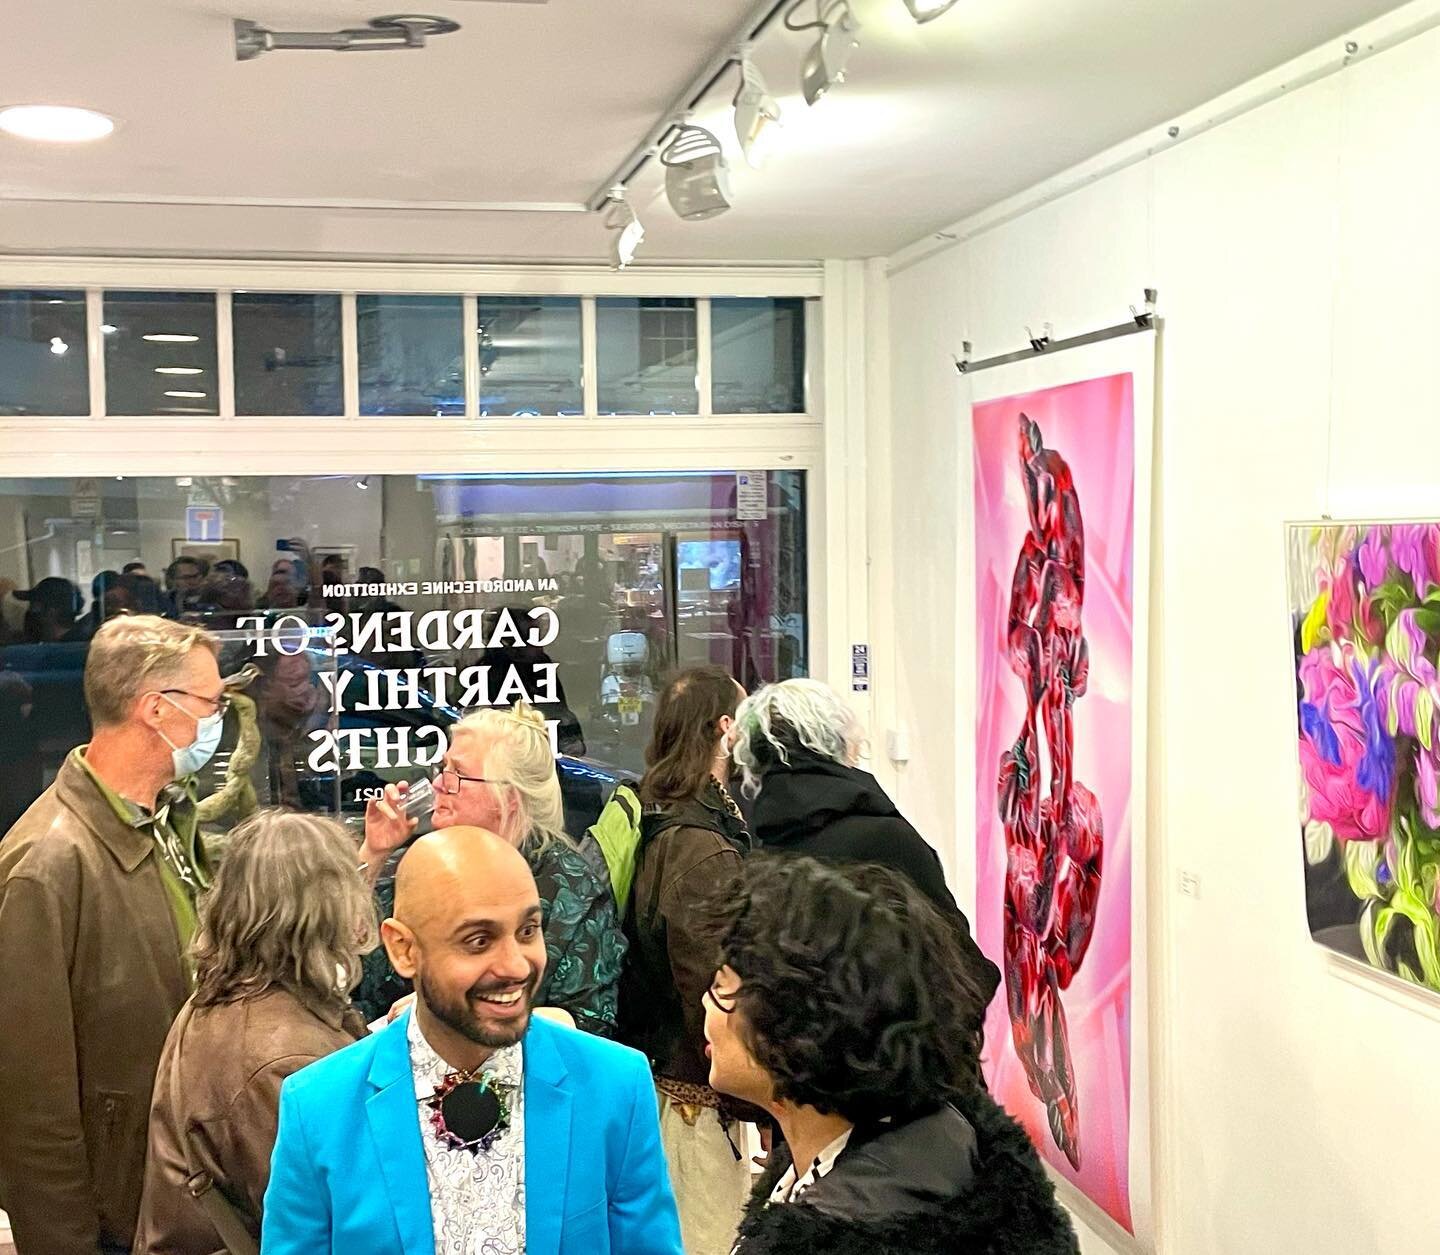 Thanks everyone for coming to the two private views. It was a lovely evening yesterday.
There is still two days left to see our show at @espaciogallery .
Today it is open from 1 till 7 and tomorrow and Sunday from 1 to 5.

#androtechne #artinlondon #